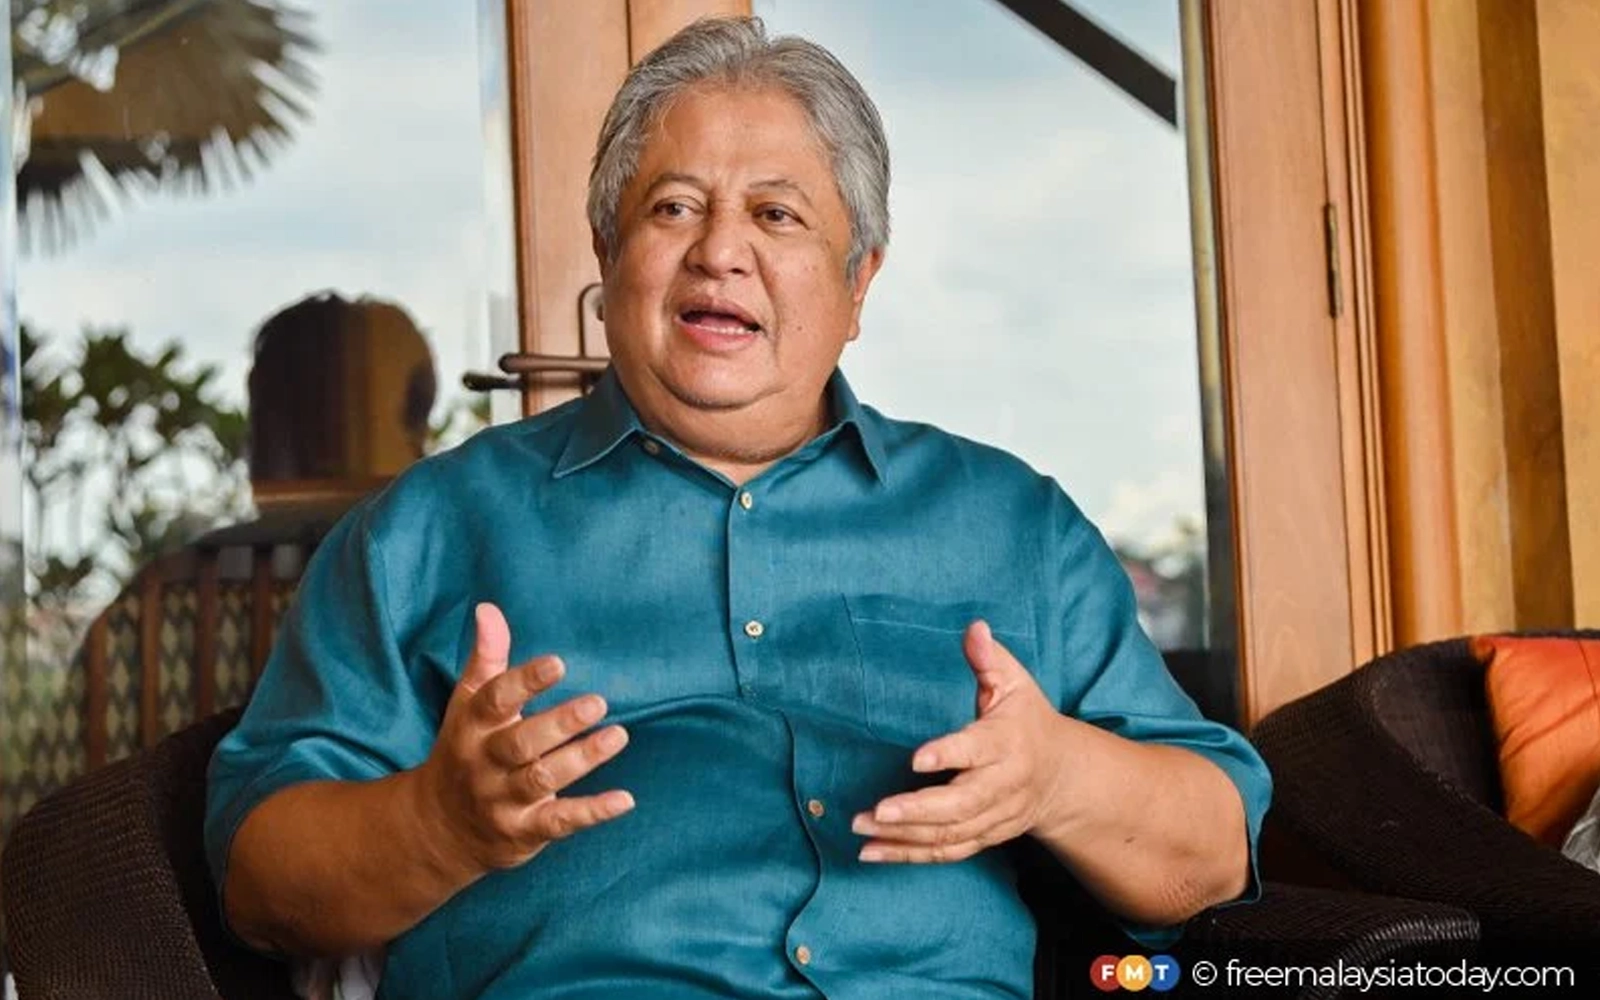 pn won’t be able to attract sizable non-malay support, says zaid